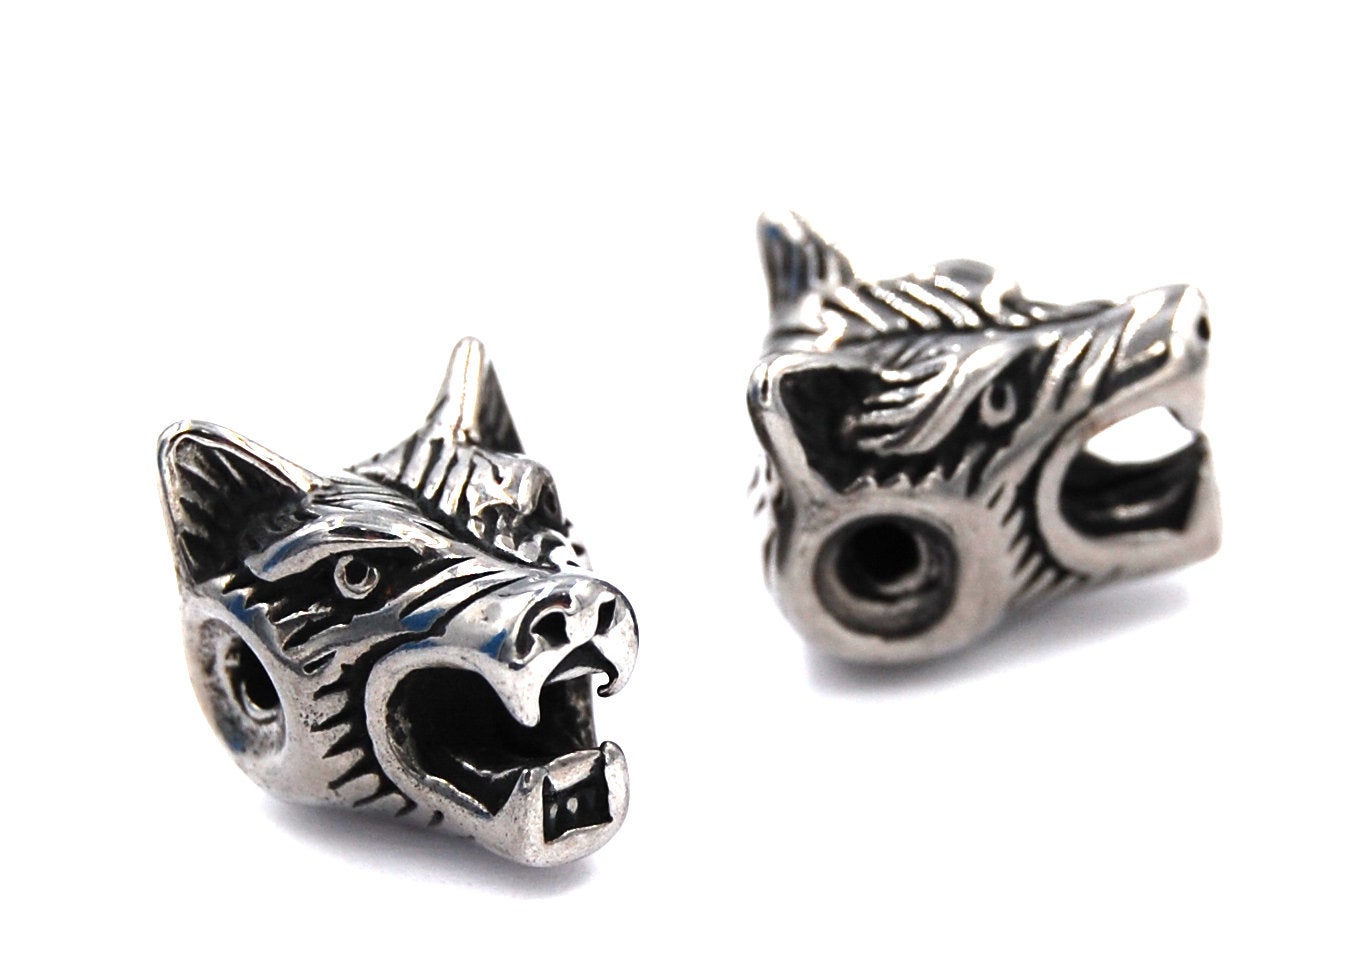 304 Stainless Steel Beads, Wolf Head, Antique Silver Size: about 11mm wide, 14mm long, 11mm thick -1pc